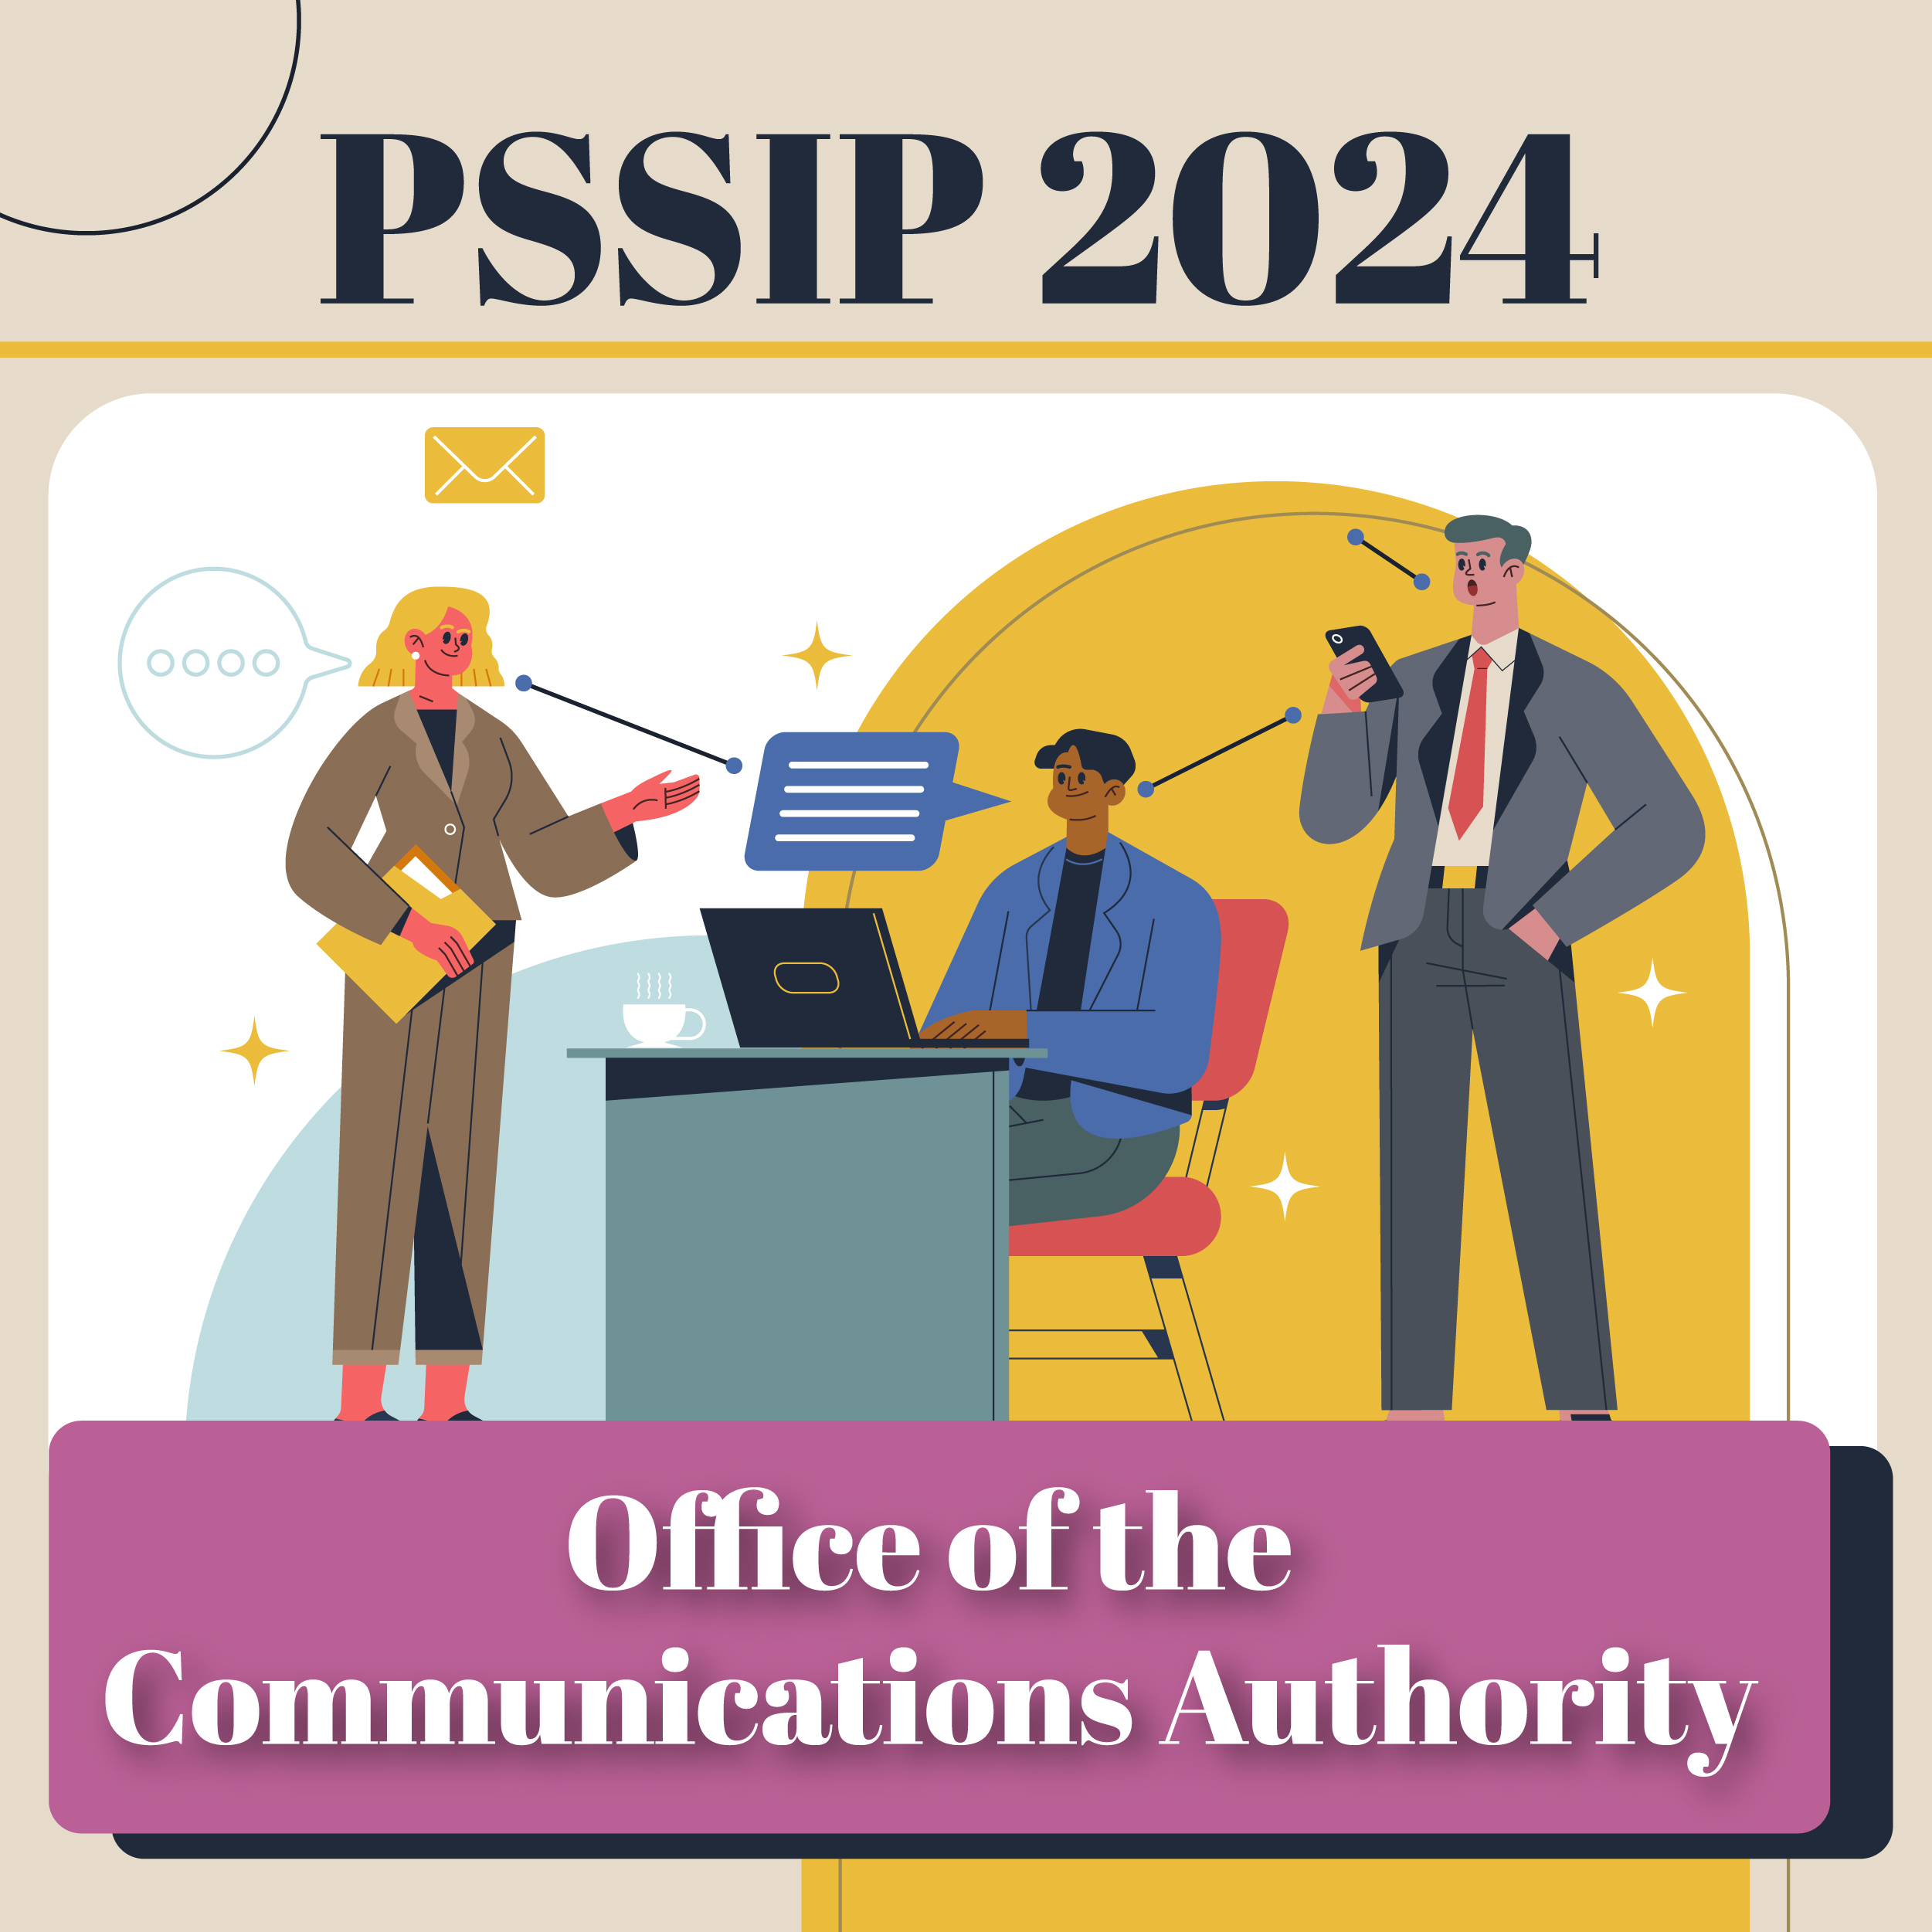 PSSIP2024 – Office of the Communications Authority